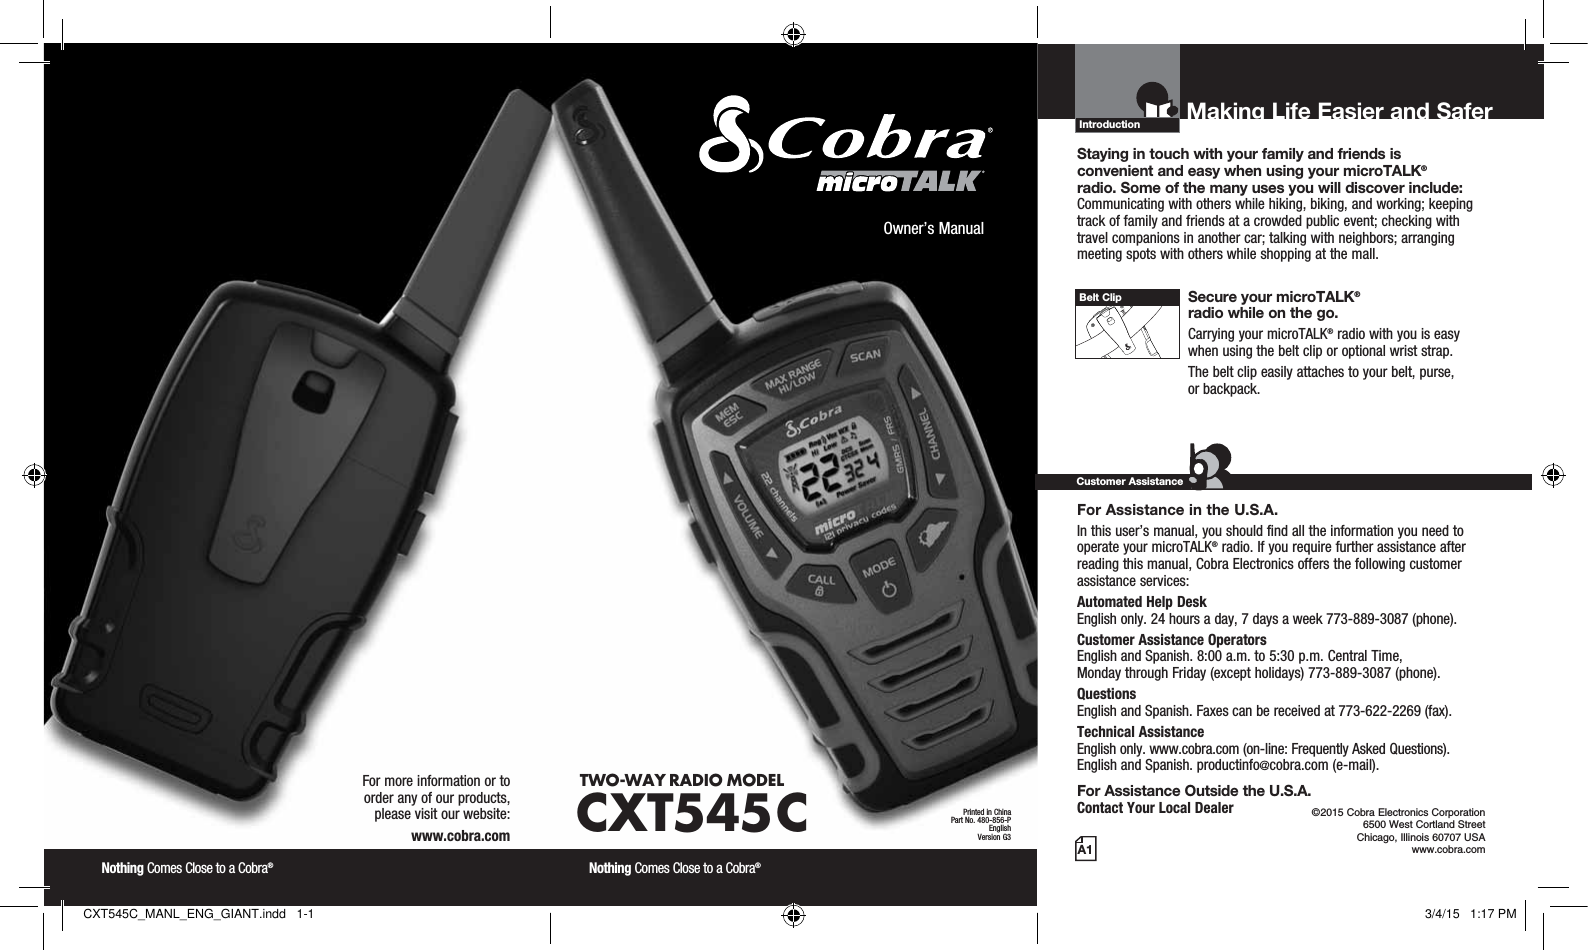 Introduction©2015 Cobra Electronics Corporation 6500 West Cortland Street Chicago, Illinois 60707 USAwww.cobra.comMaking Life Easier and Safer Staying in touch with your family and friends is  convenient and easy when using your microTALK®  radio. Some of the many uses you will discover include:Communicating with others while hiking, biking, and working; keeping track of family and friends at a crowded public event; checking with travel companions in another car; talking with neighbors; arranging meeting spots with others while shopping at the mall. Secure your microTALK®  radio while on the go.Carrying your microTALK® radio with you is easy when using the belt clip or optional wrist strap. The belt clip easily attaches to your belt, purse,  or backpack.For Assistance in the U.S.A. In this user’s manual, you should find all the information you need to operate your microTALK® radio. If you require further assistance after reading this manual, Cobra Electronics offers the following customer assistance services:Automated Help Desk  English only. 24 hours a day, 7 days a week 773-889-3087 (phone). Customer Assistance Operators  English and Spanish. 8:00 a.m. to 5:30 p.m. Central Time,  Monday through Friday (except holidays) 773-889-3087 (phone). Questions  English and Spanish. Faxes can be received at 773-622-2269 (fax). Technical Assistance  English only. www.cobra.com (on-line: Frequently Asked Questions).  English and Spanish. productinfo@cobra.com (e-mail).For Assistance Outside the U.S.A. Contact Your Local DealerCustomer AssistanceA1Owner’s ManualNothing Comes Close to a Cobra® Nothing Comes Close to a Cobra® For more information or to  order any of our products,  please visit our website:www.cobra.comBelt ClipTWO-WAY RADIO  MODEL CXT545 CPrinted in ChinaPart No. 480-856-PEnglishVersion G3CXT545C_MANL_ENG_GIANT.indd   1-1 3/4/15   1:17 PM